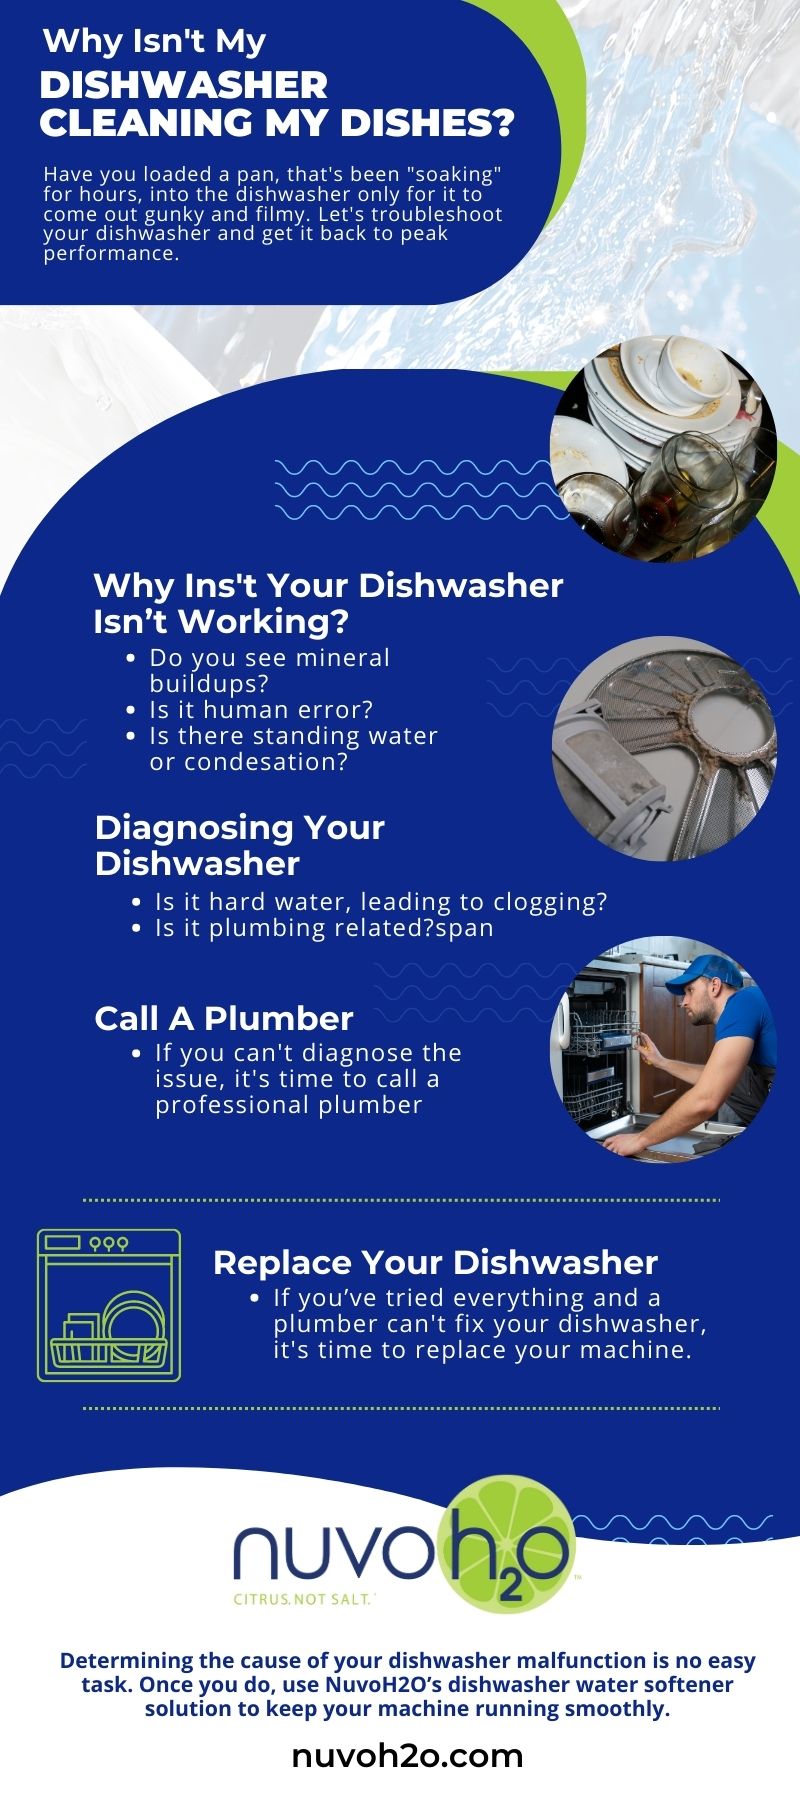 Dishwasher not cleaning dishes? Here's how to fix